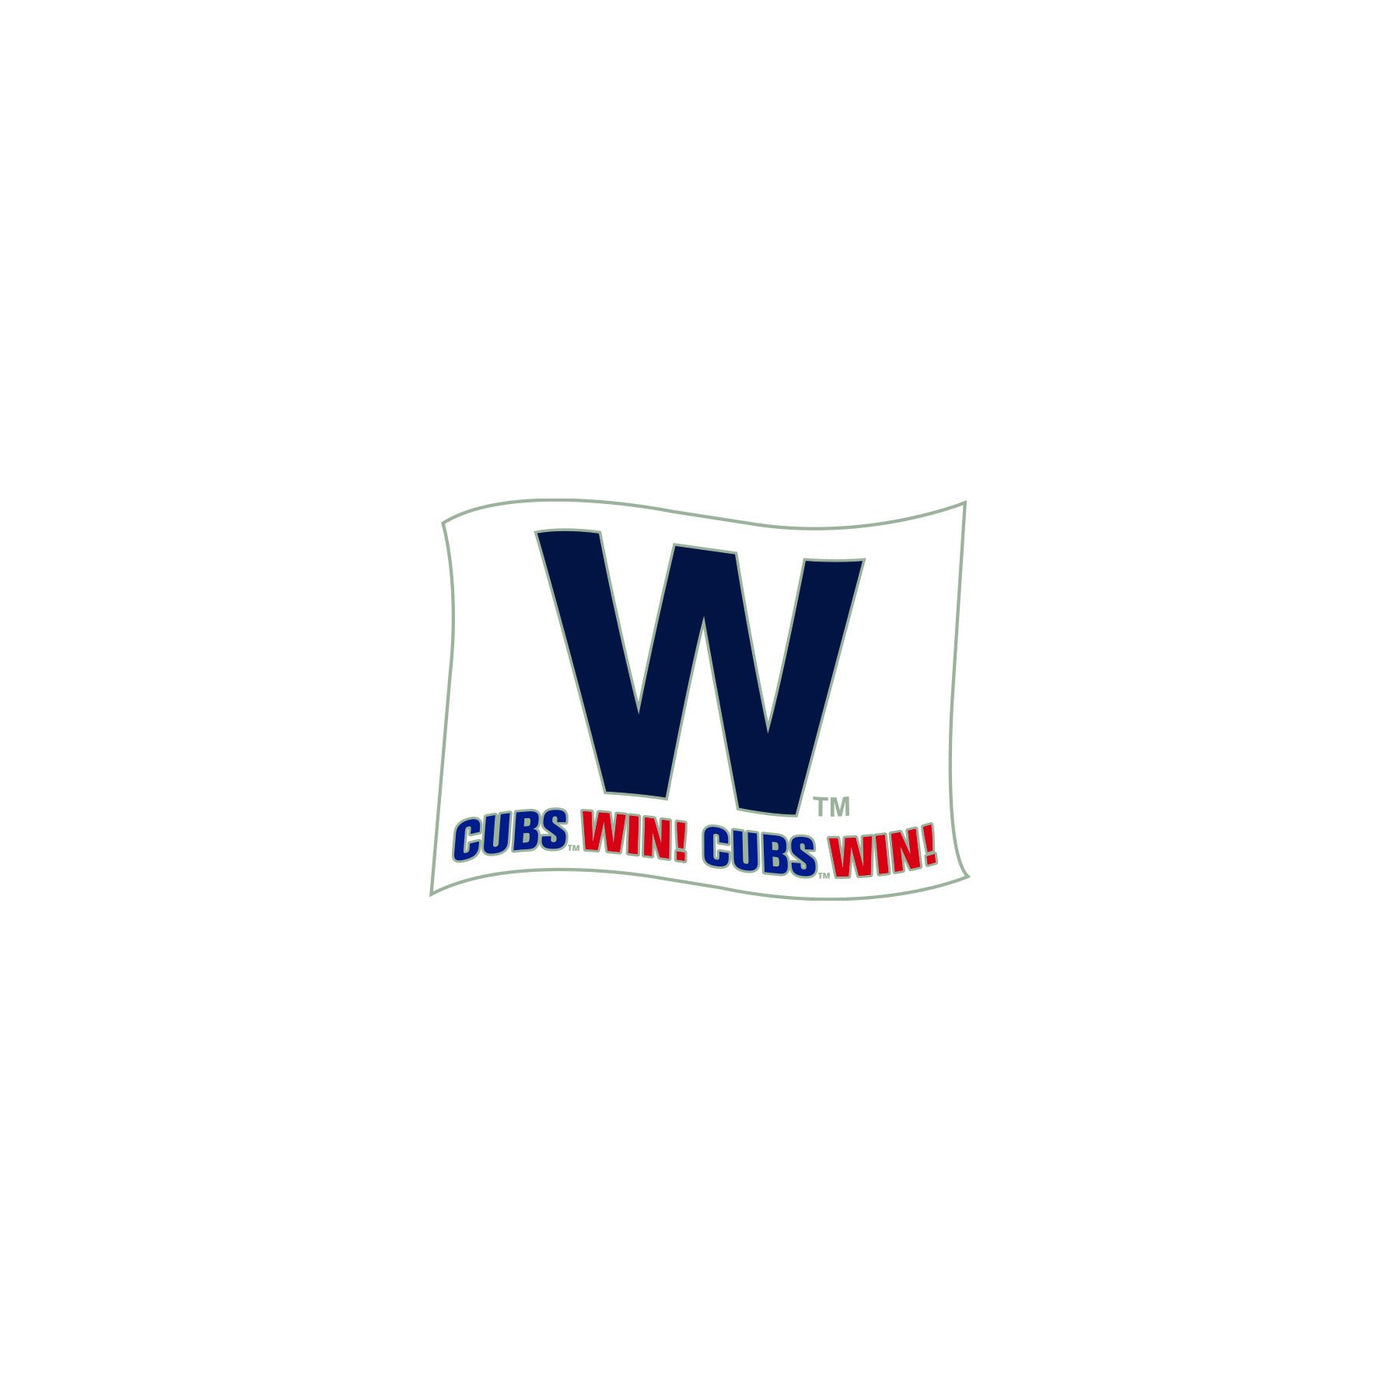 Chicago Cubs W Flag Lapel Pin - Fly The W! Win Button - Baseball Wrigley